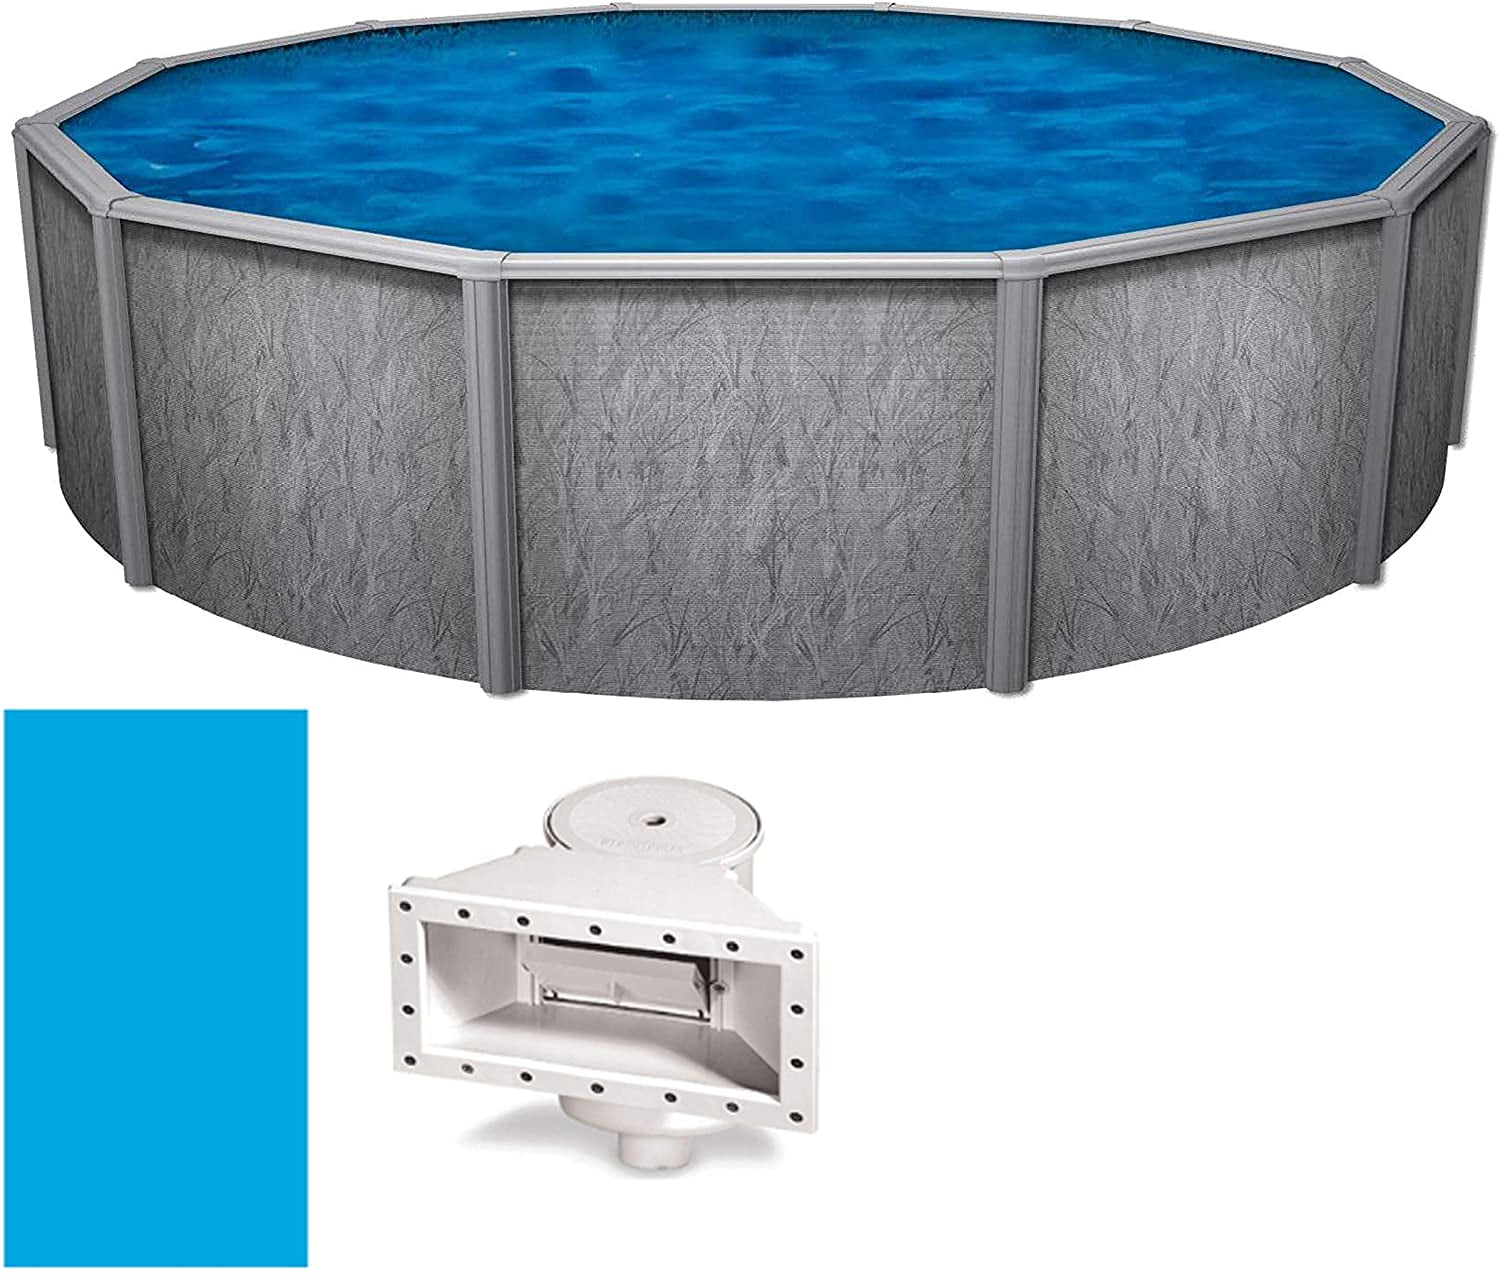 Simple Sandstone 18 Round Above Ground Swimming Pool for Small Space